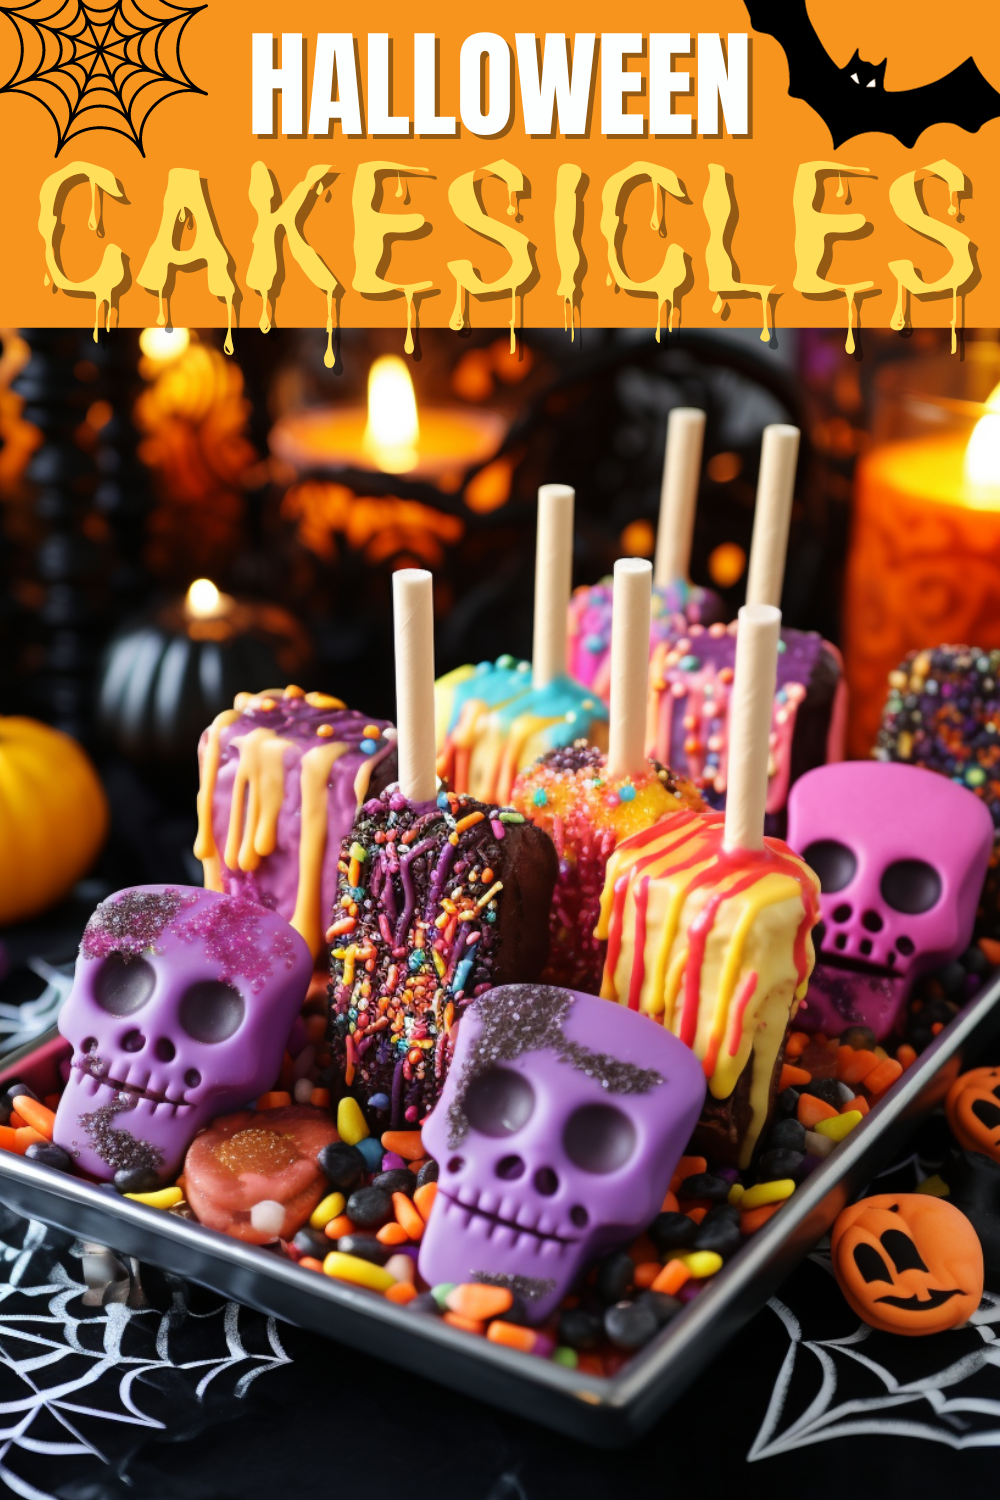 How to Make Pumpkin Cakesicles for Halloween Party Treats